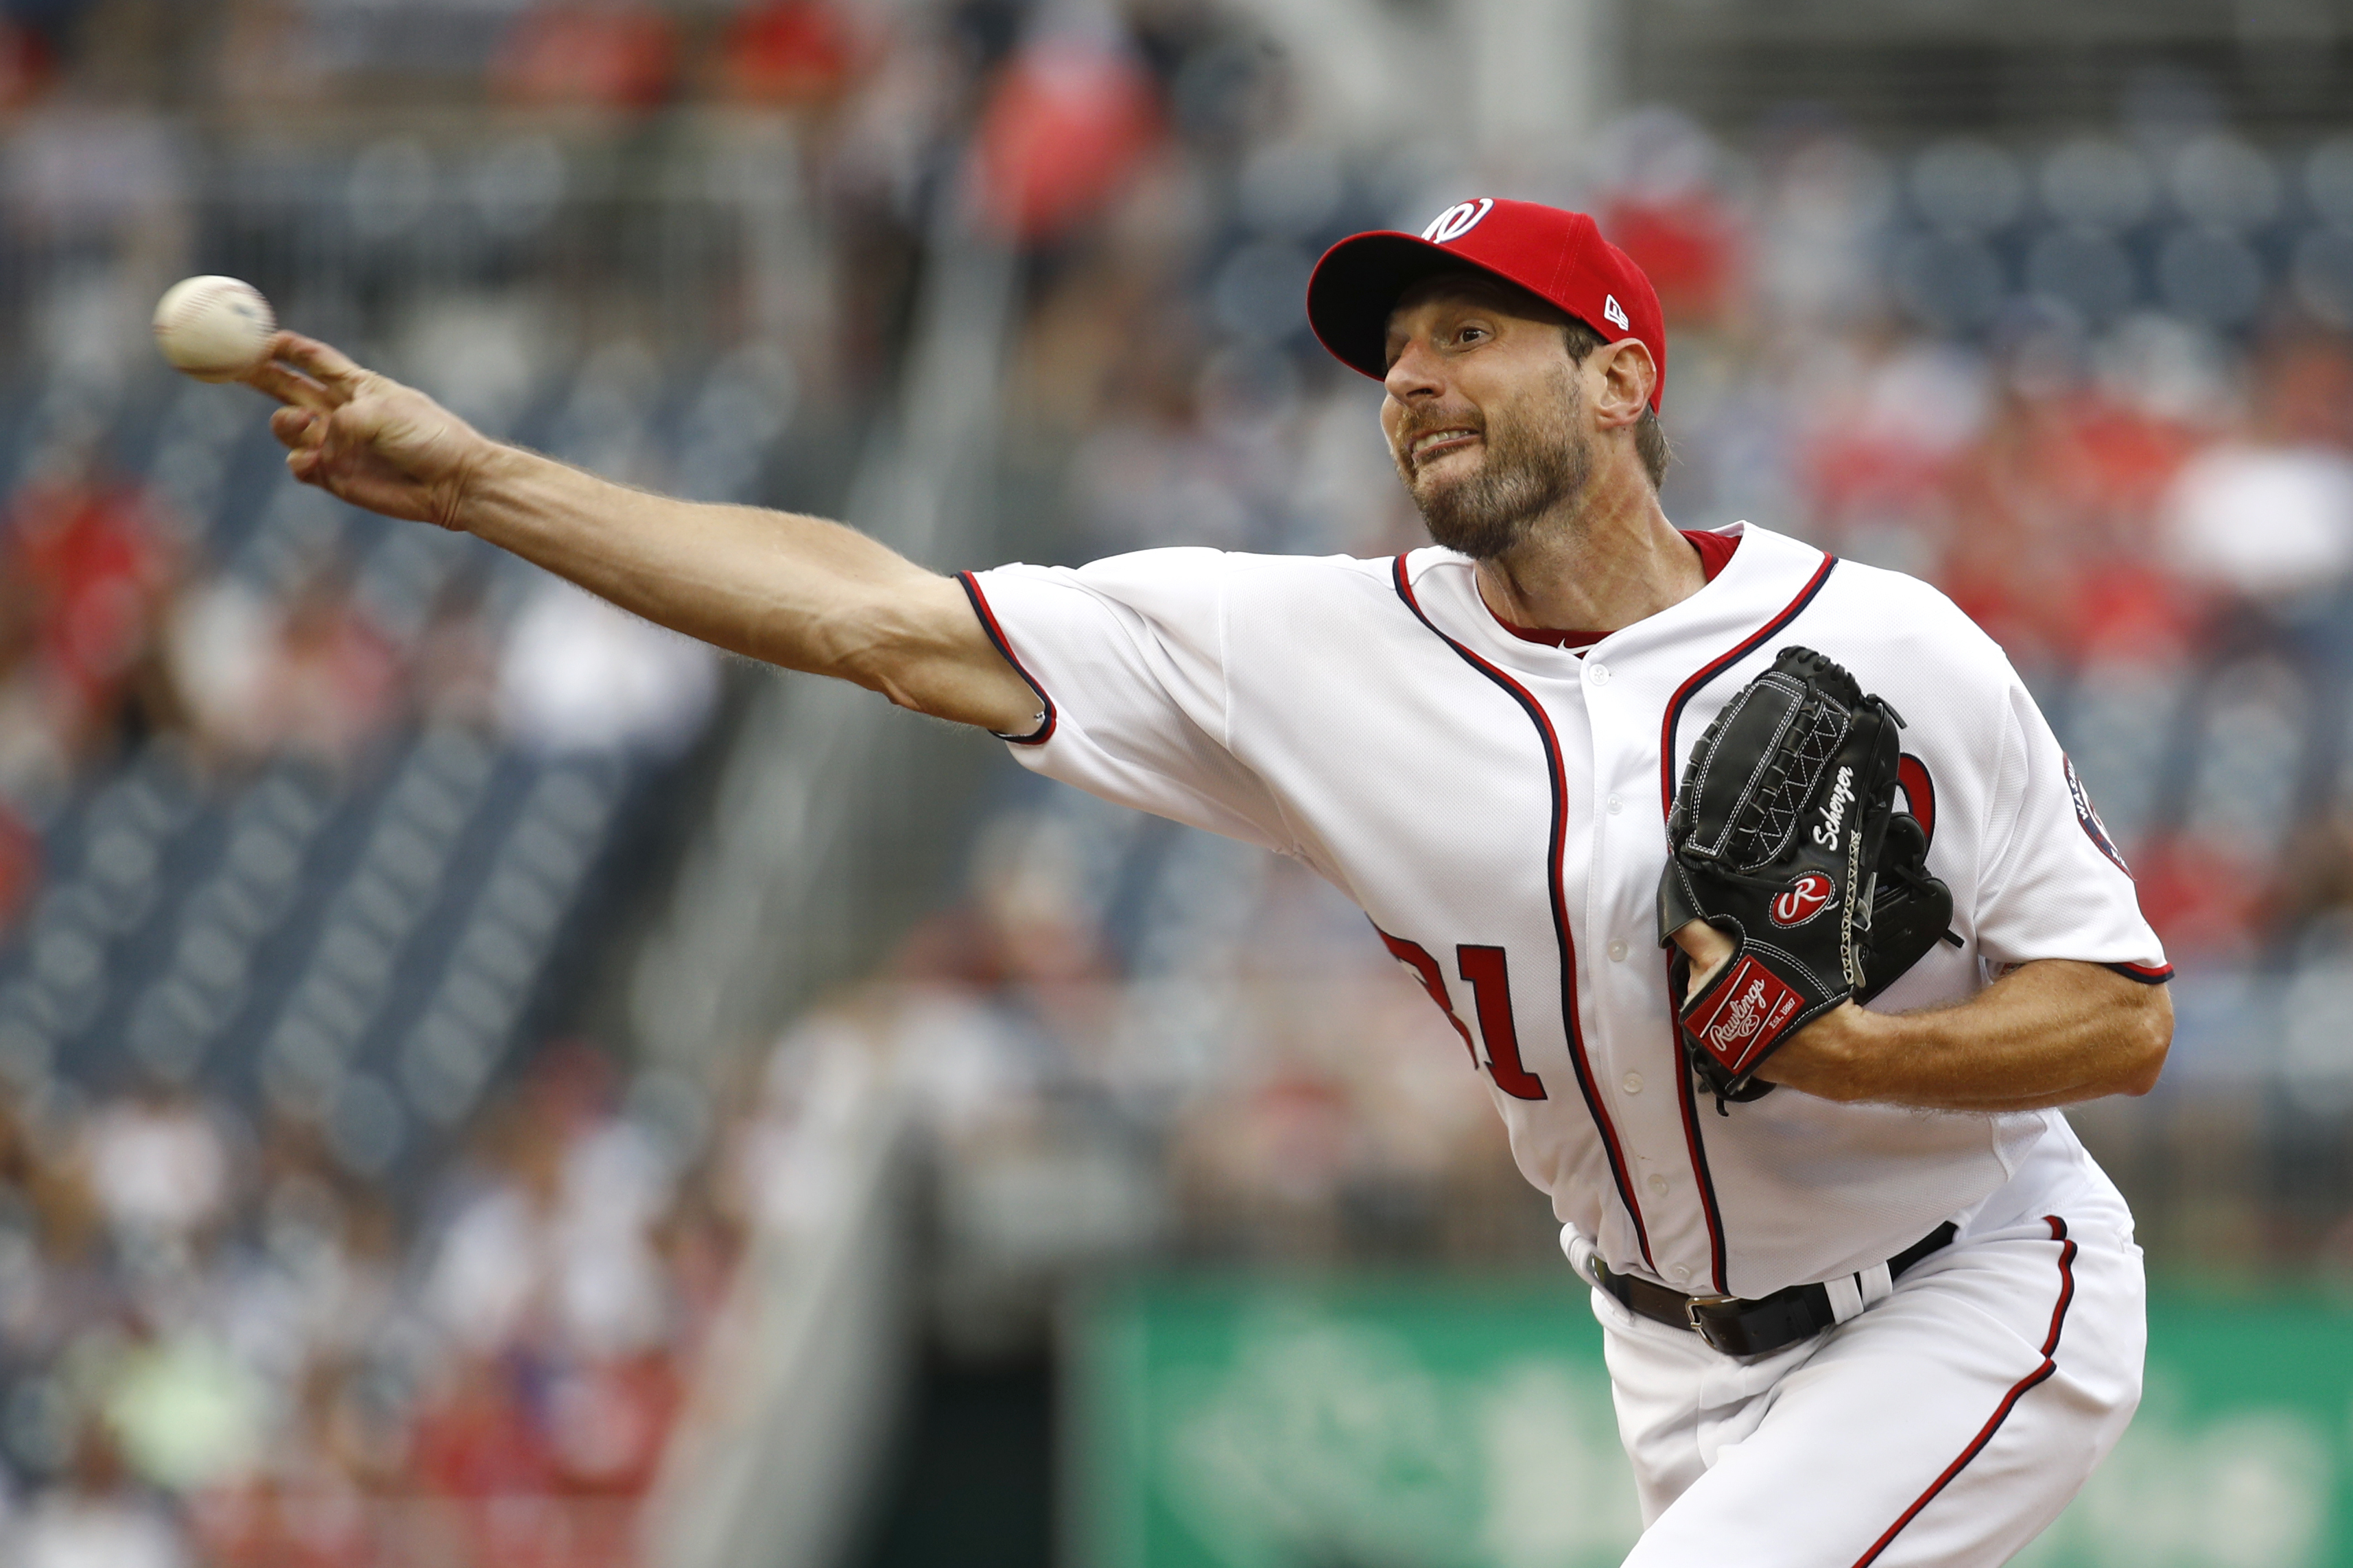 A day after returning from IL, Scherzer has strained back